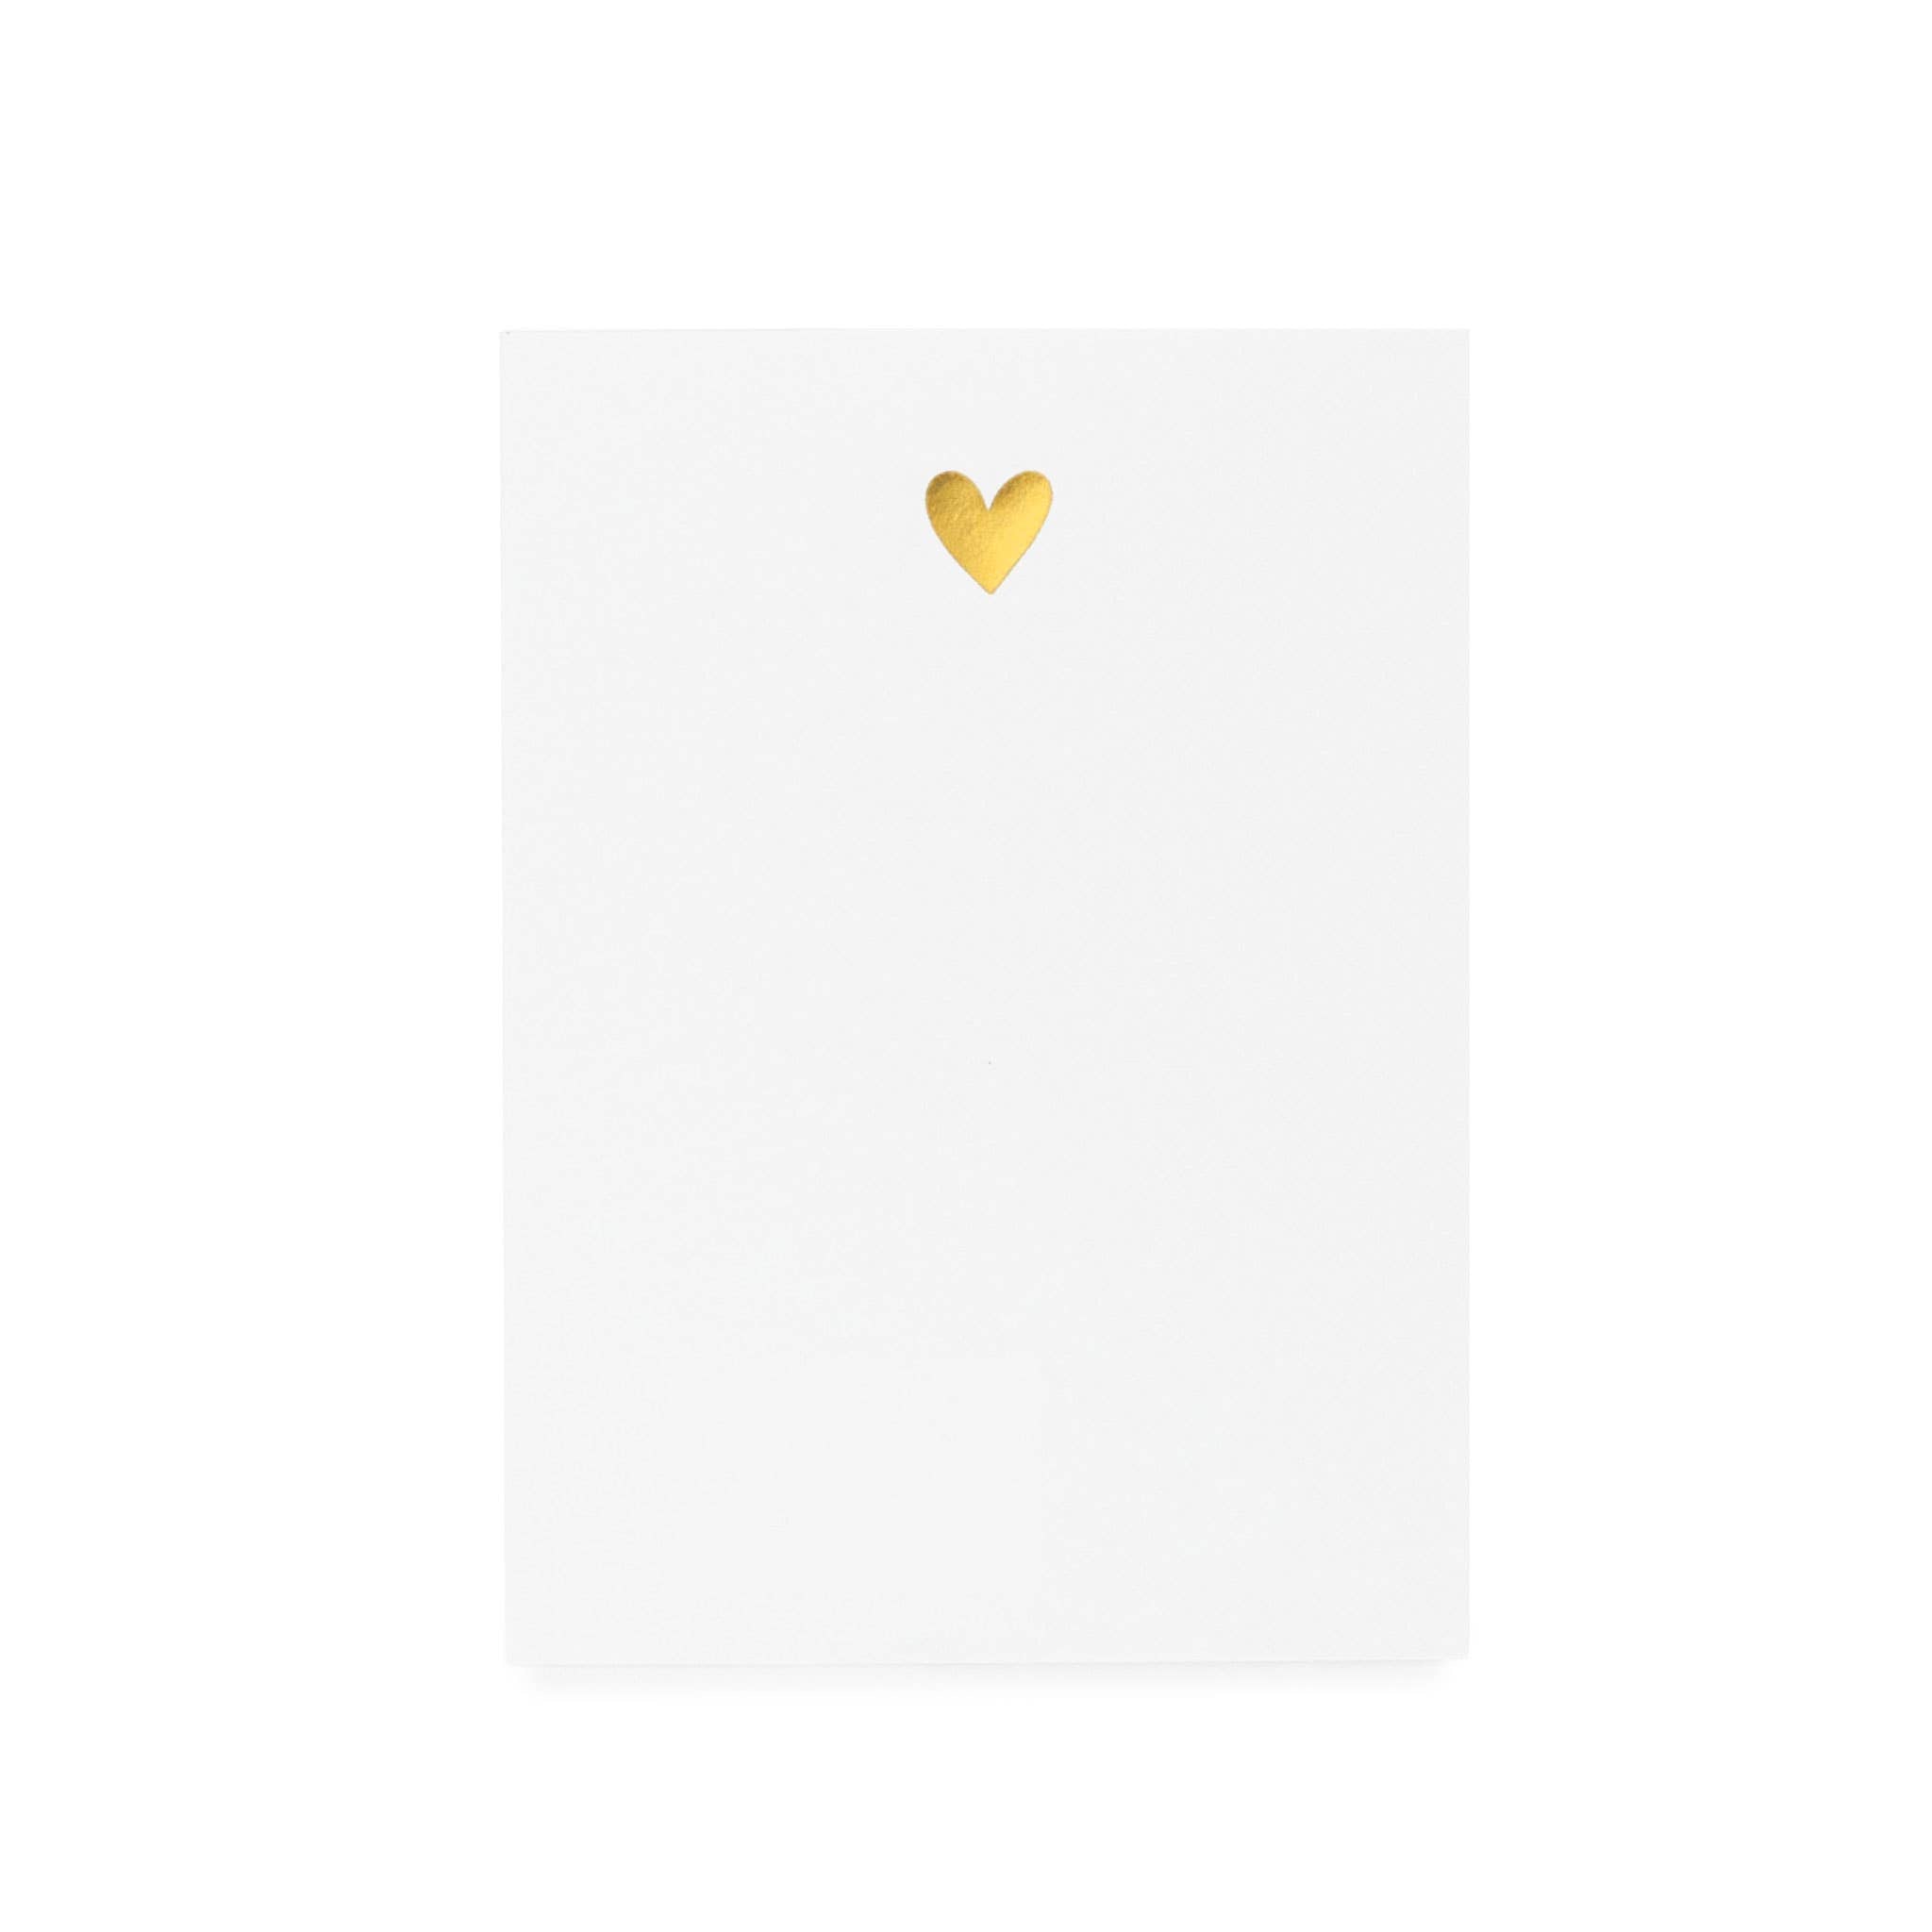 Blank white notepad with a gold heart in the center.